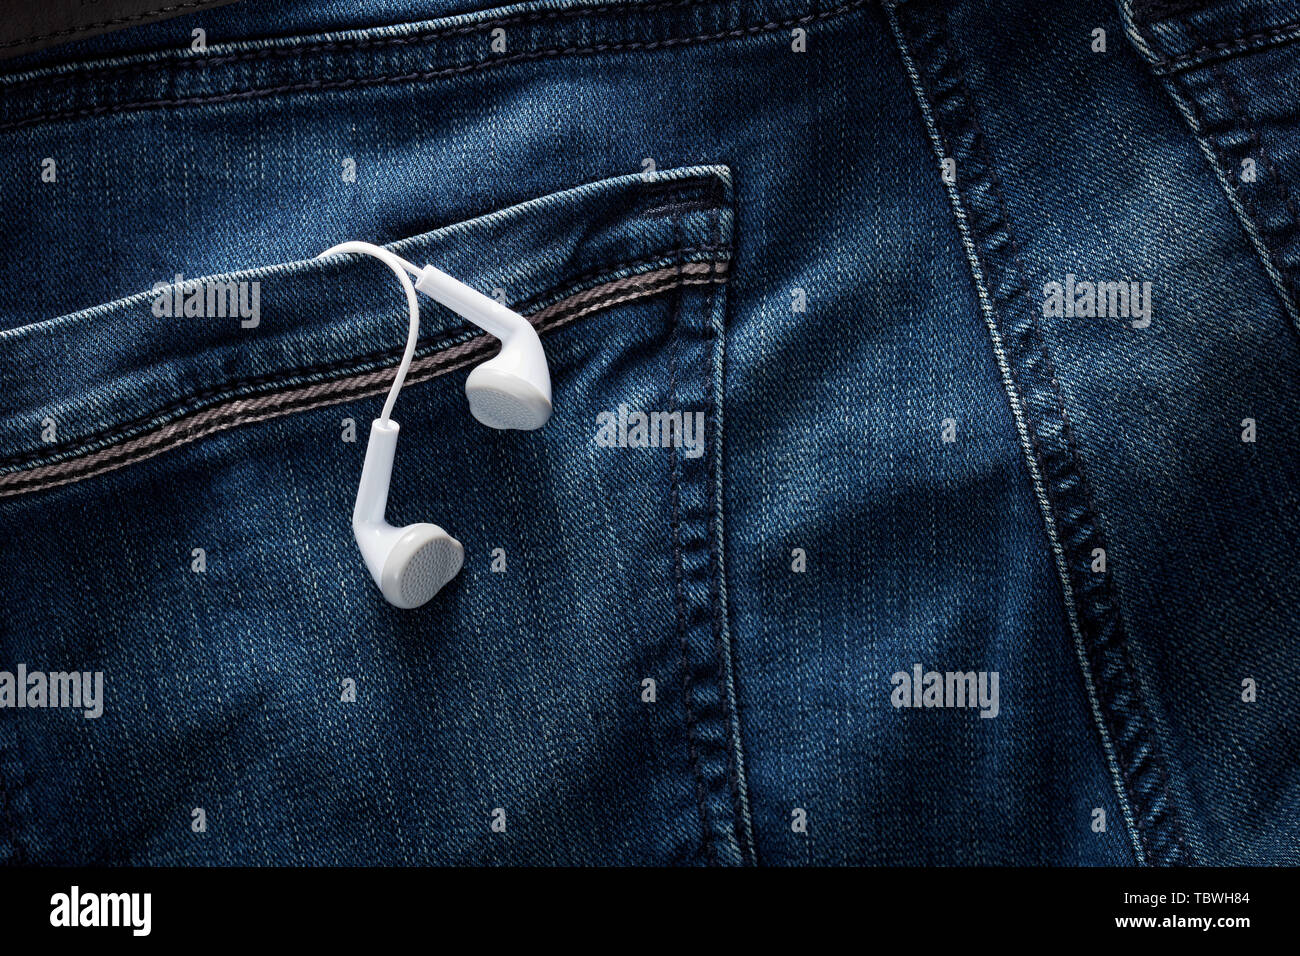 White earphones in the back pocket of a blue jean under dark dramatic moody  lighting. Close up view Stock Photo - Alamy